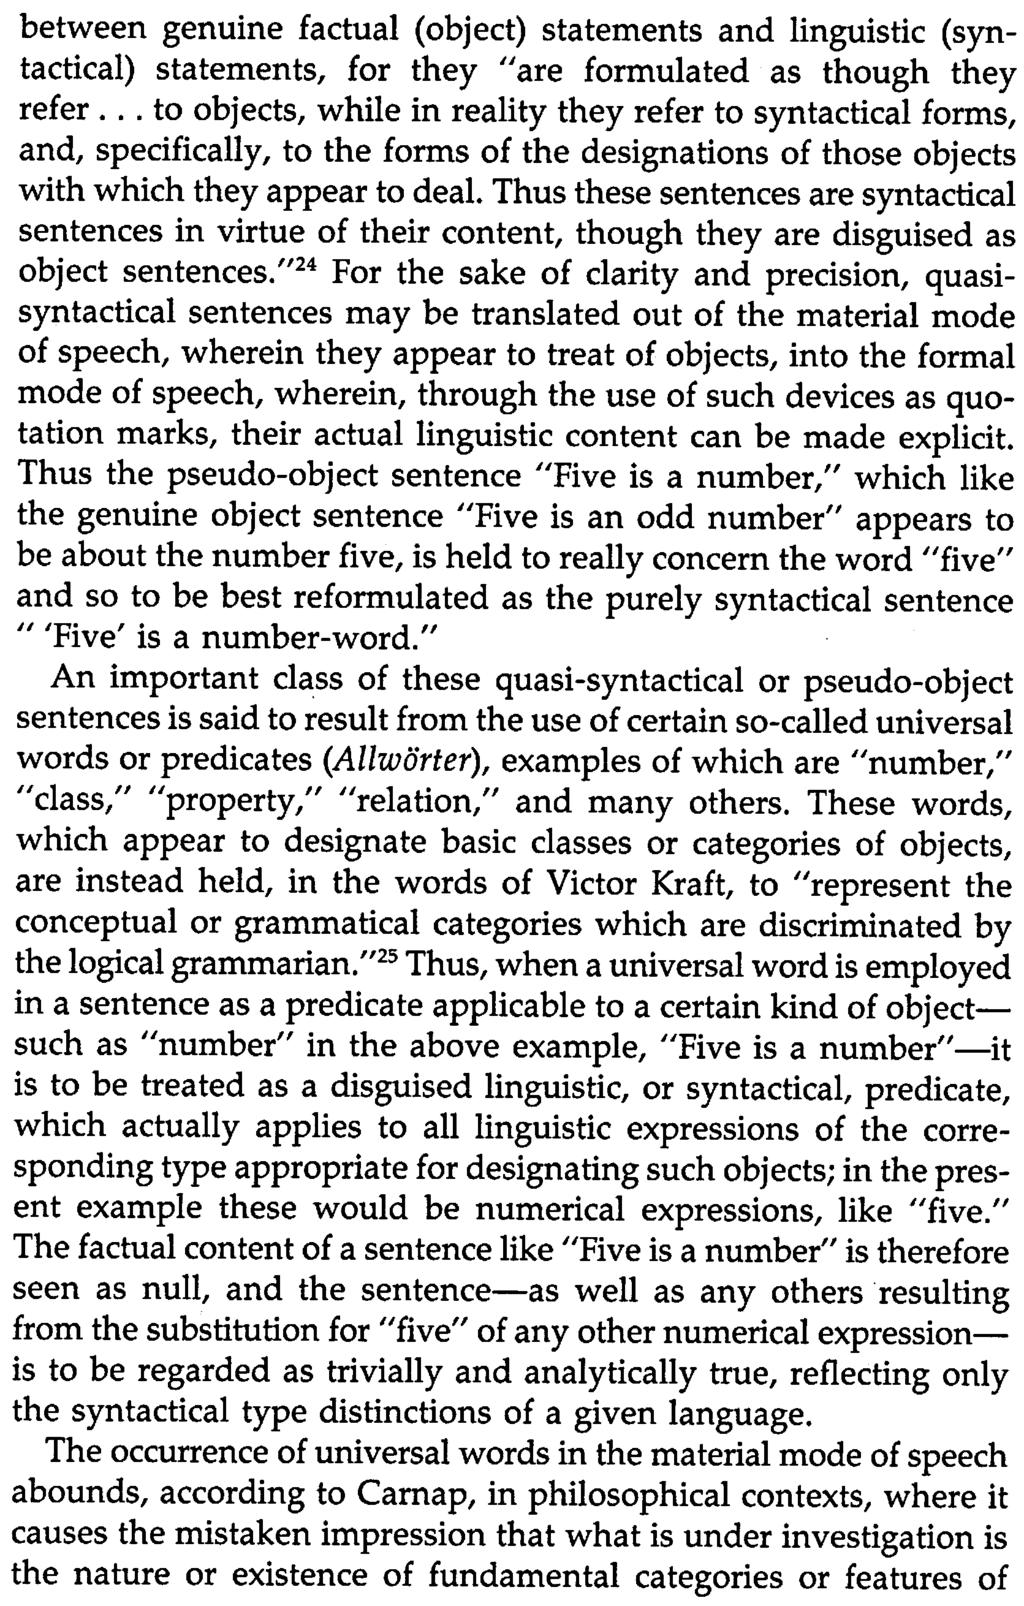 The Rejection of Metaphysics 13 between genuine factual (object ) statements and linguistic (syntactical ) statements, for they " are formulated as though they refer.